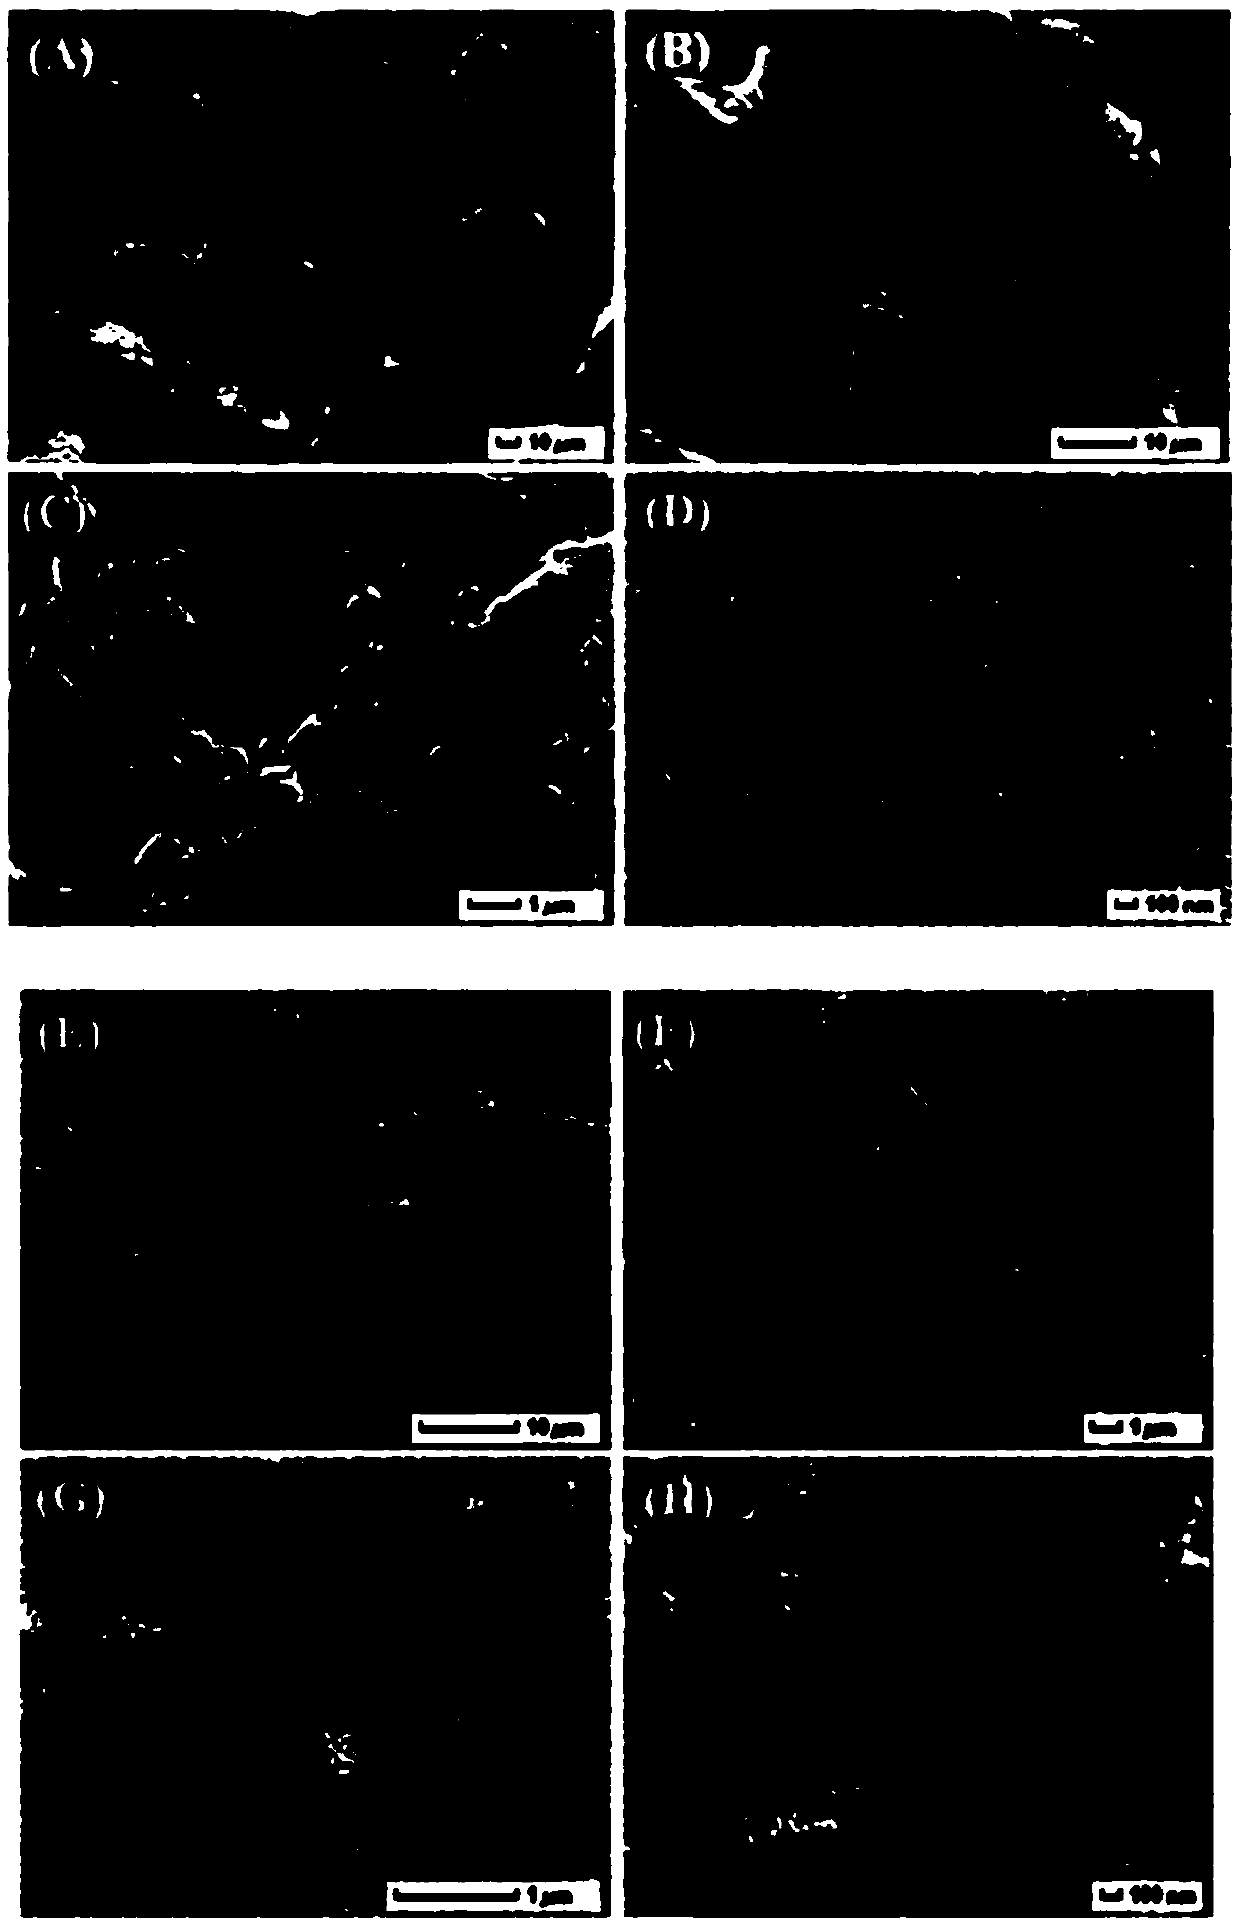 Method for preparing high-density boric acid site adsorbent based on supramolecular interface assembly strategy